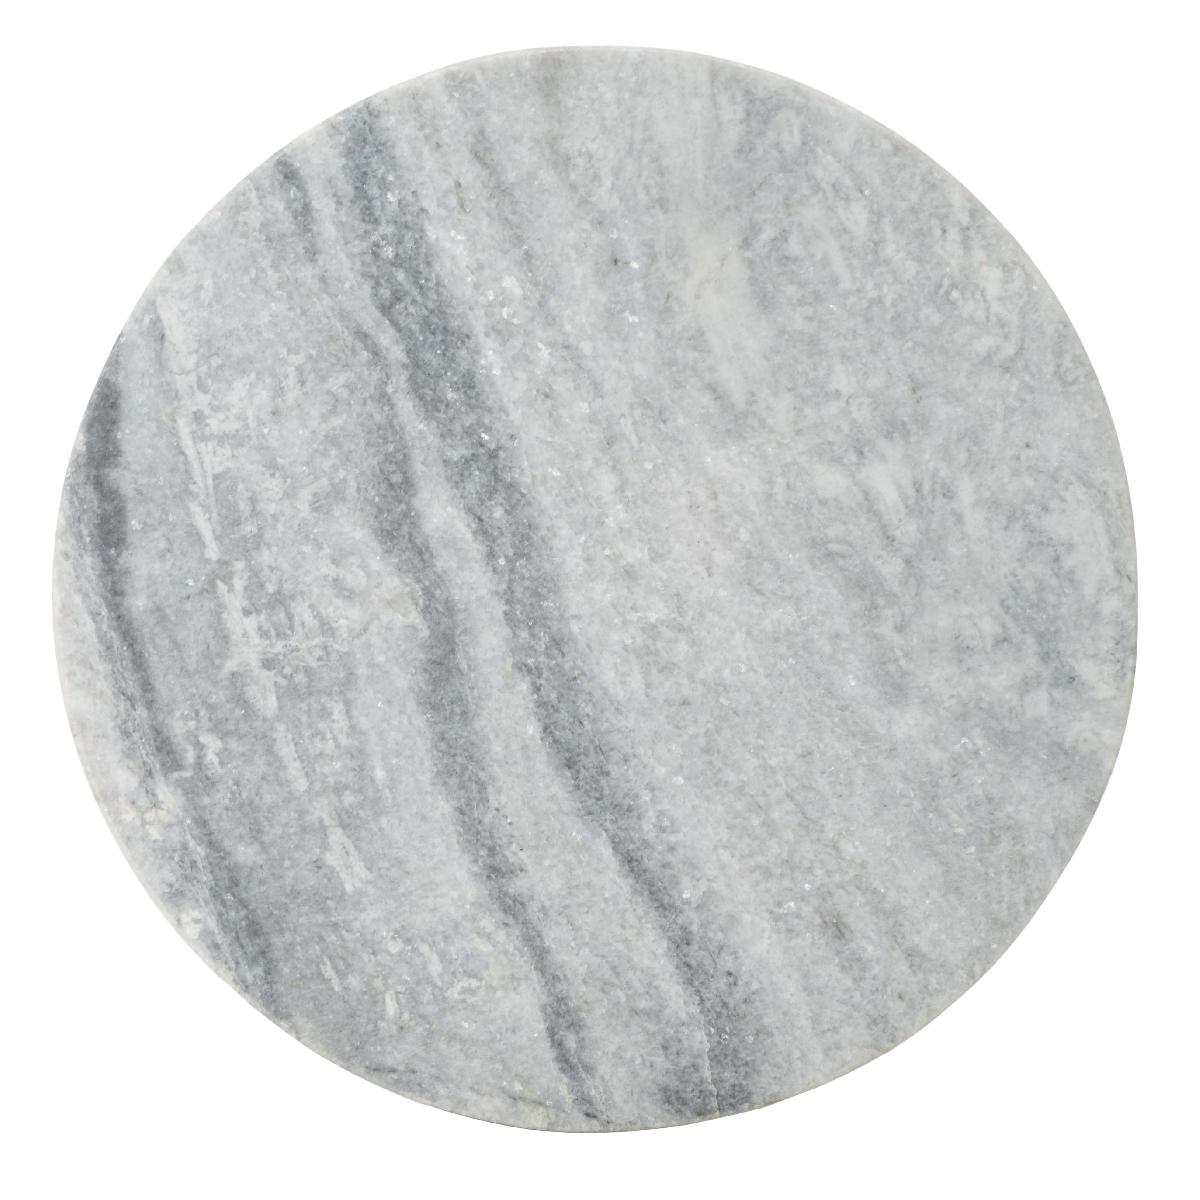 Safavieh Couture Valentia Round Marble Accent Table - Light Grey